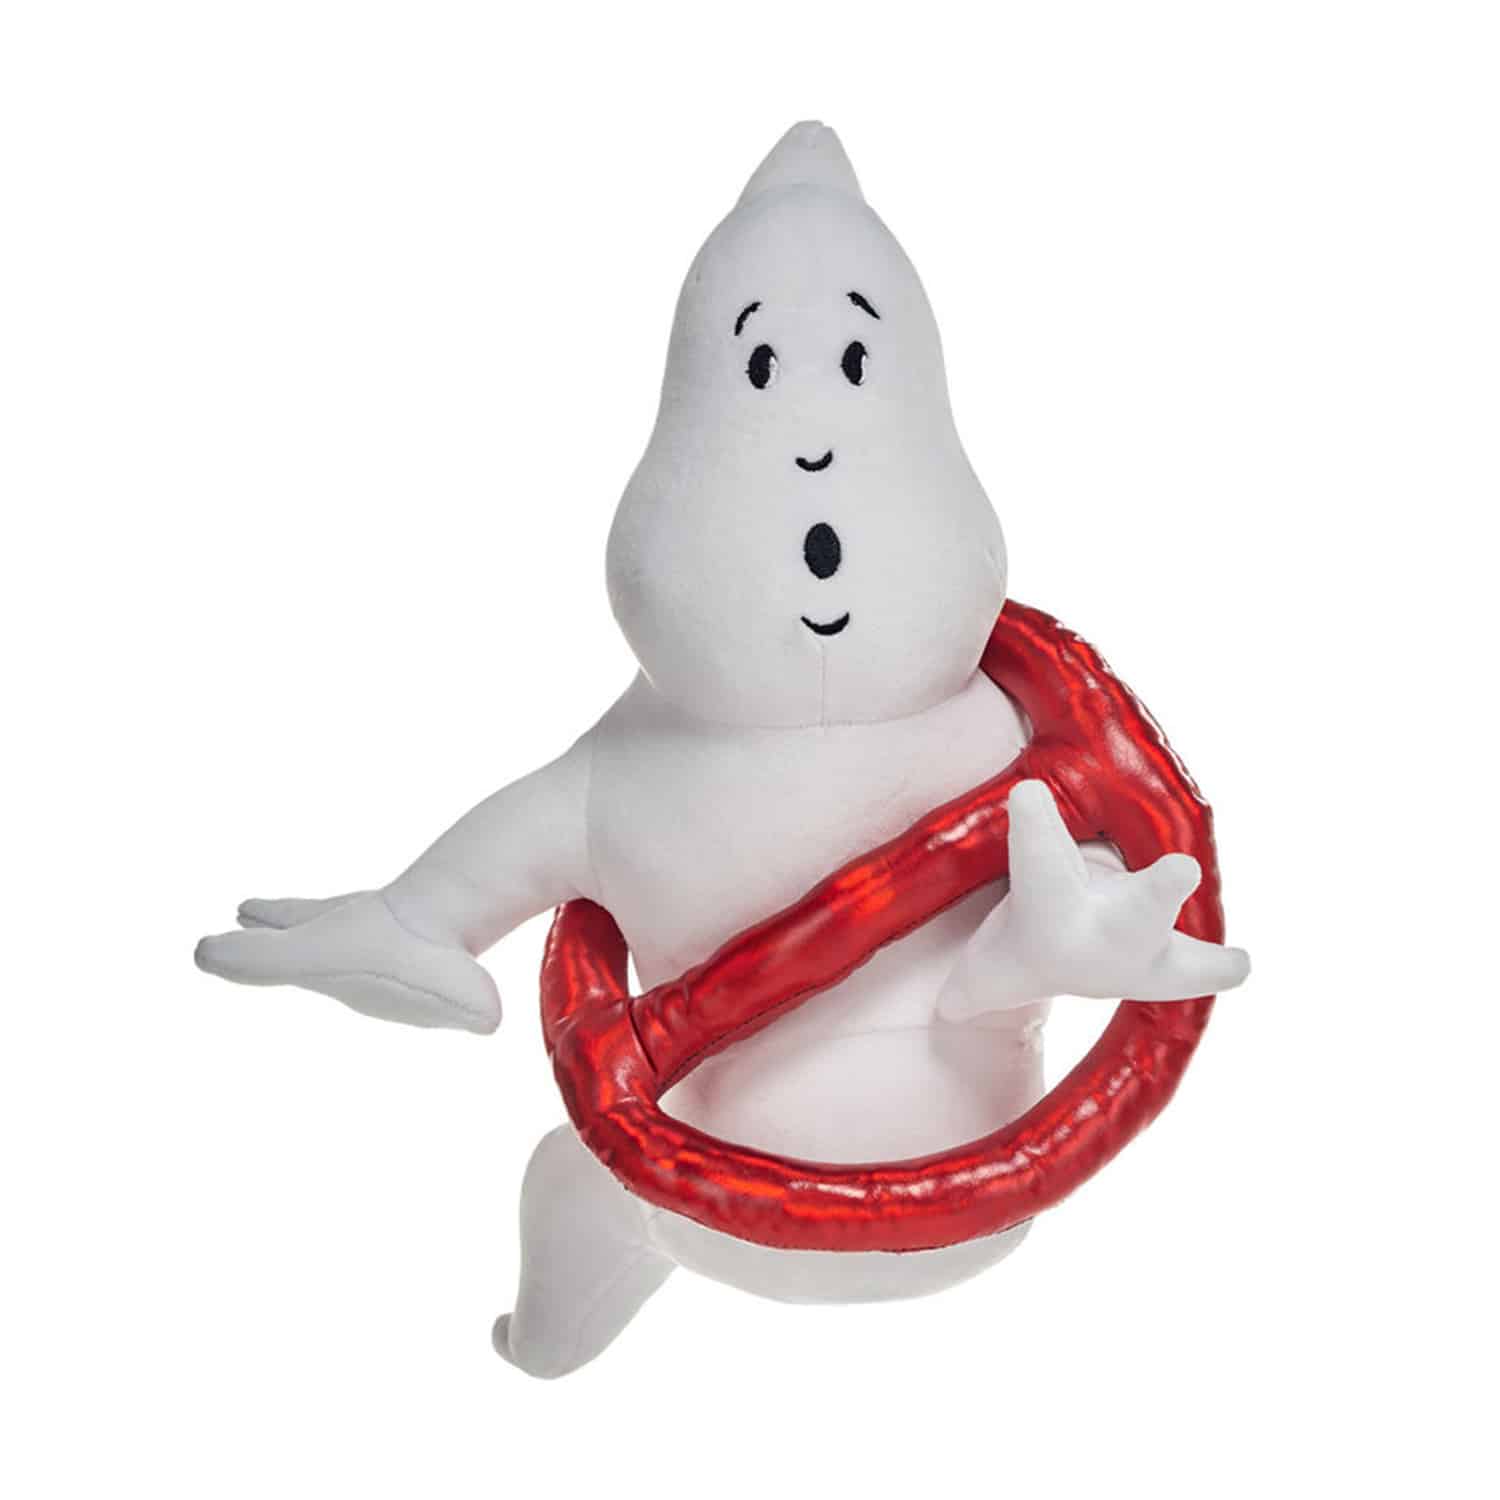 Ghostbusters - No Ghost Plush Toy